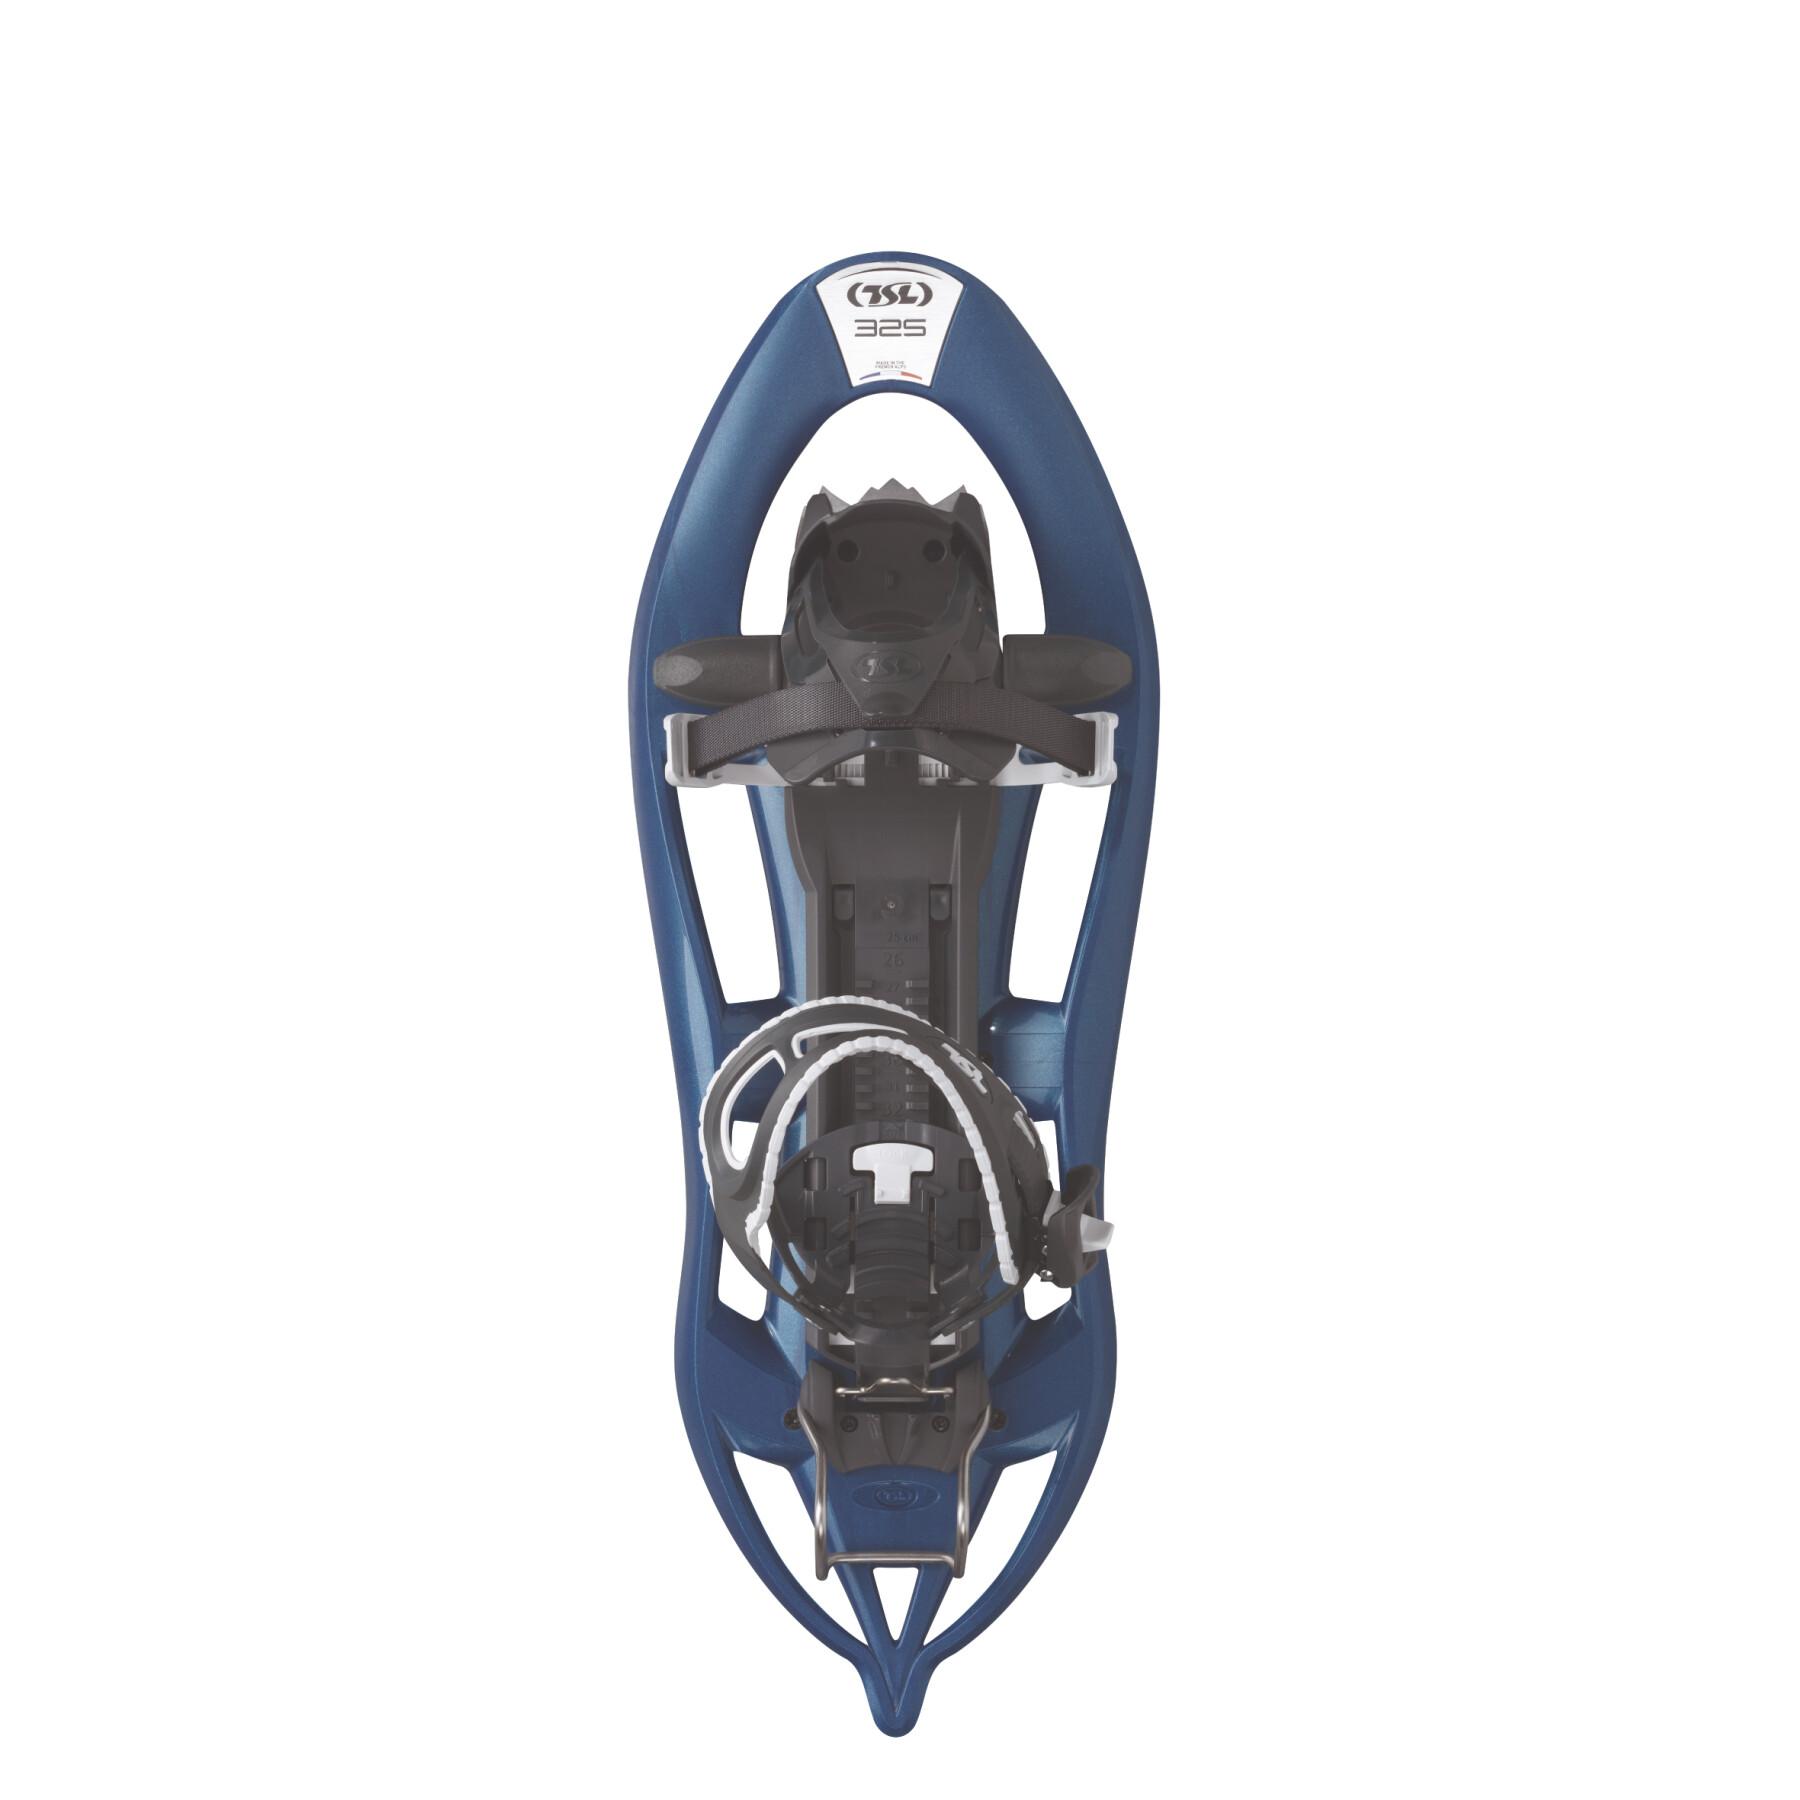 Snowshoes (size 39 to 47) TSL Rescue 325 Stellar Elevation